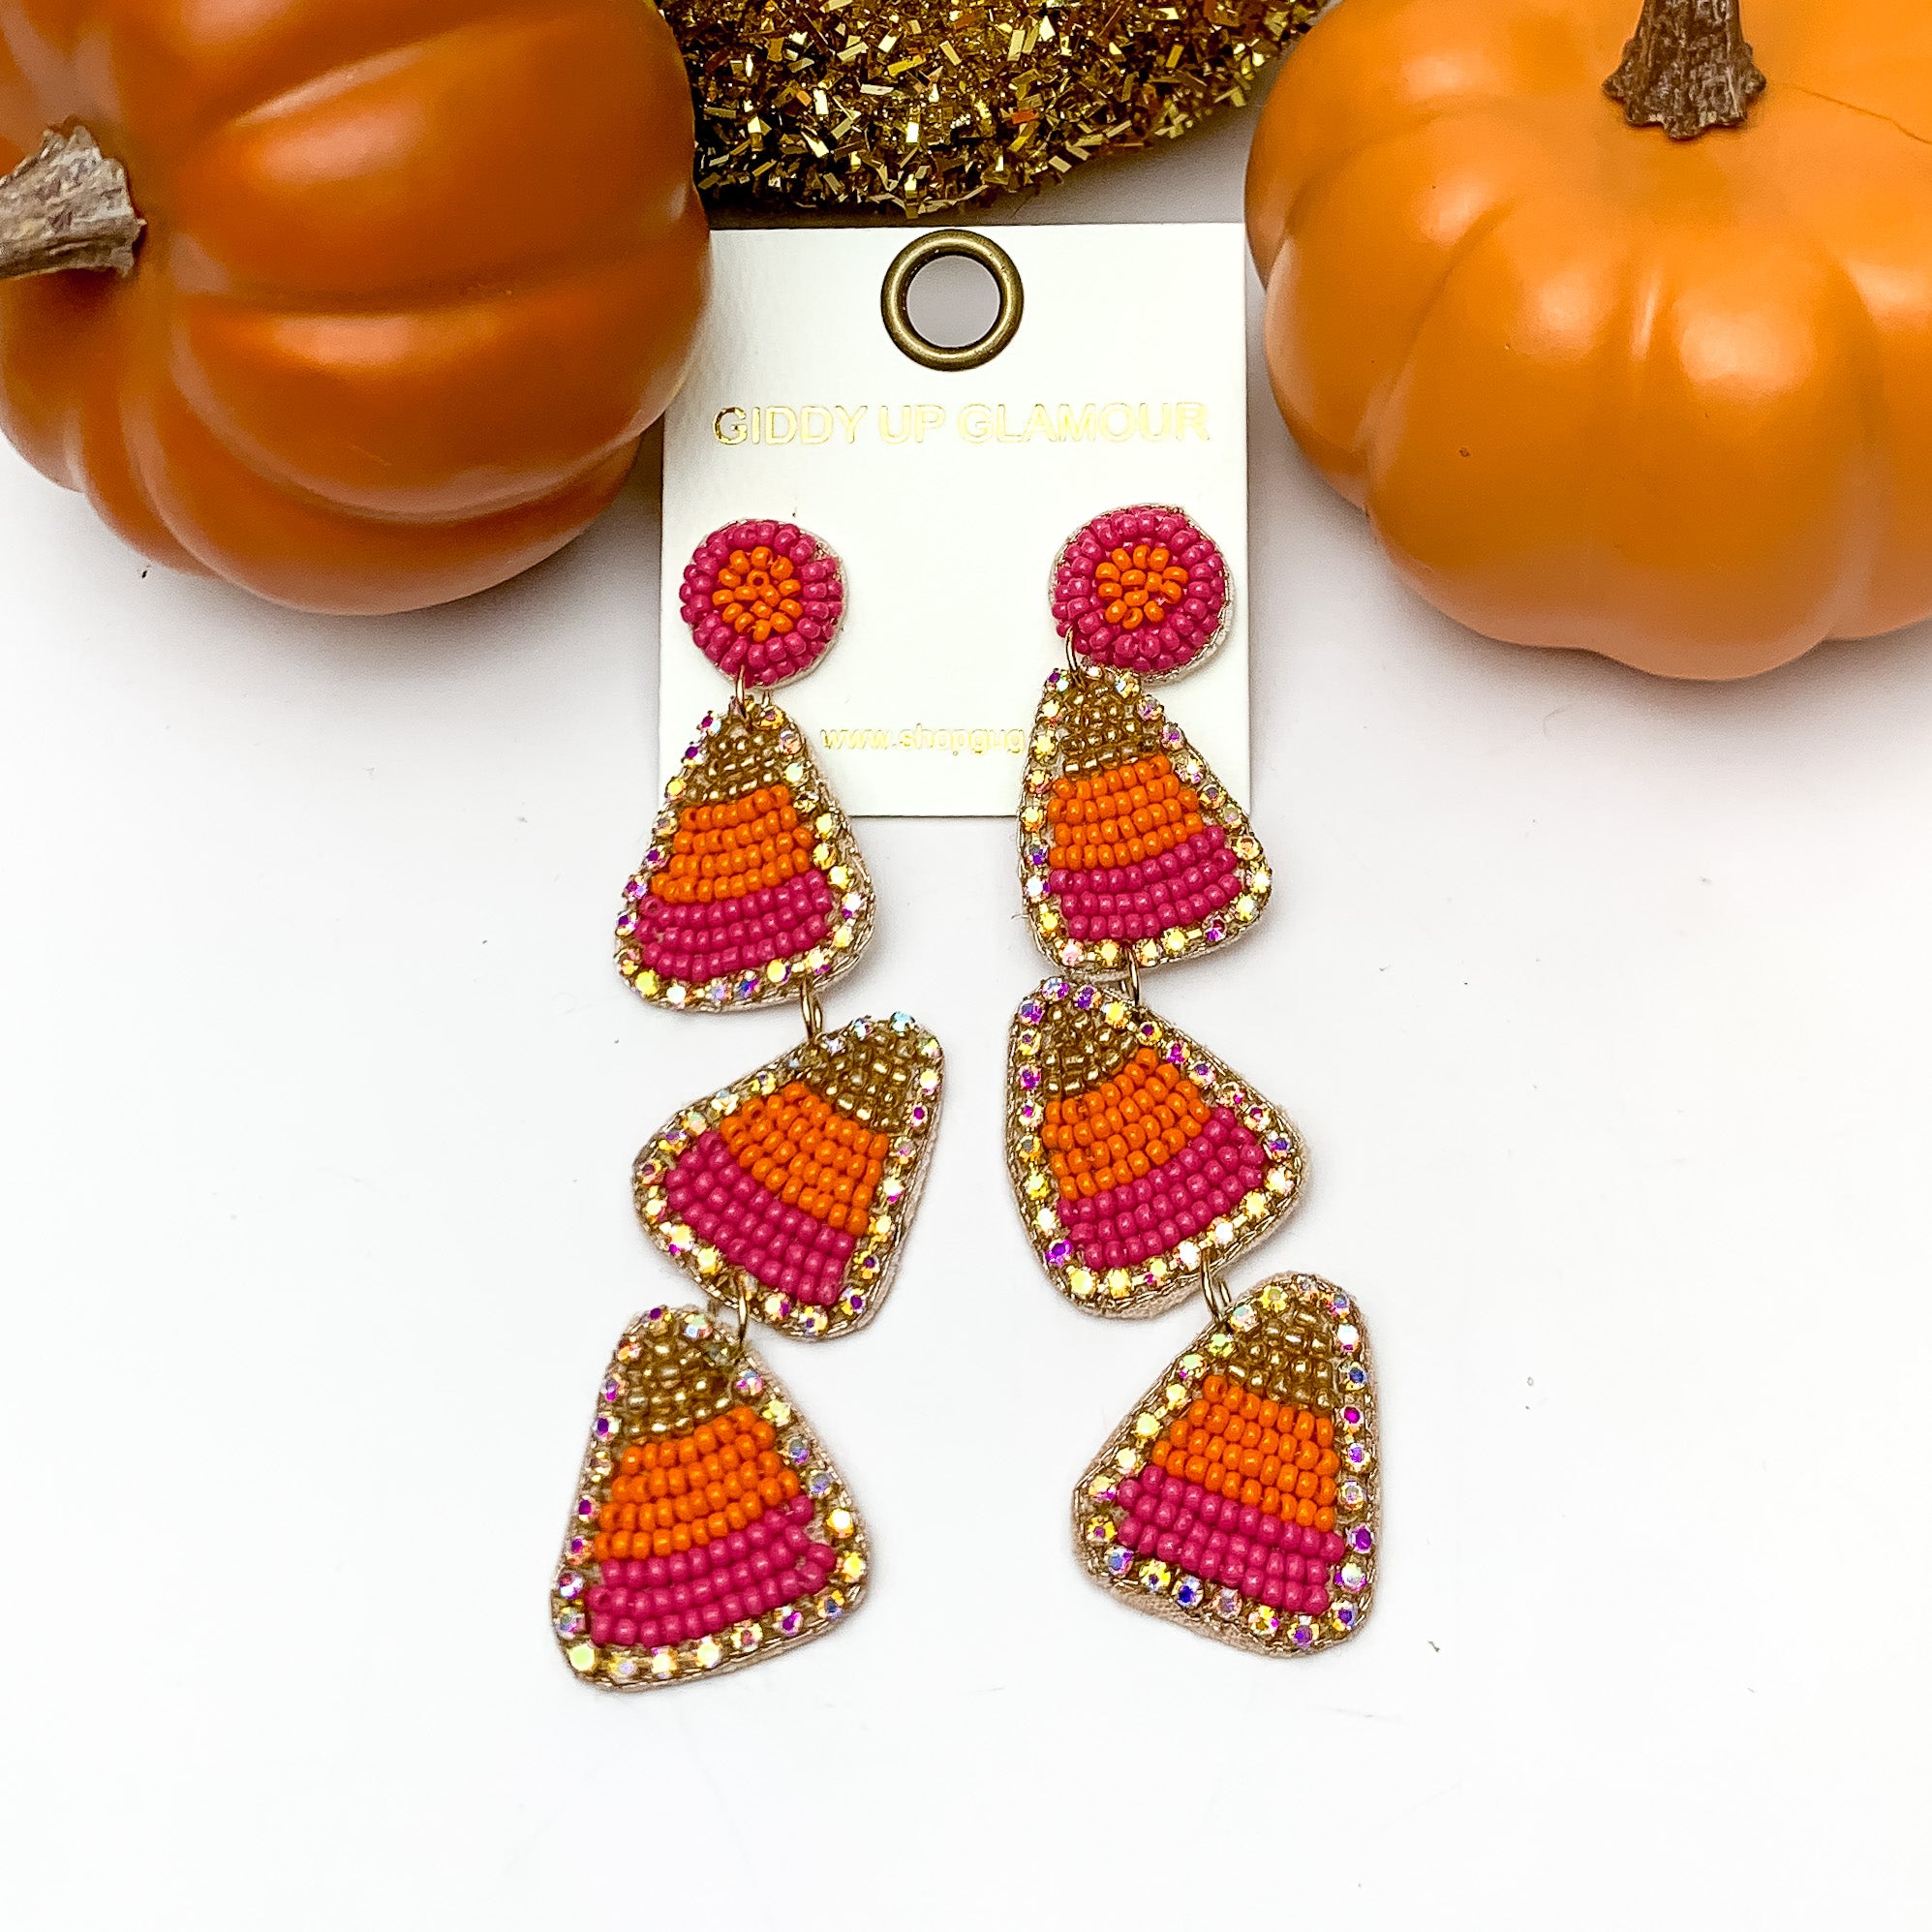 Three Tier Candy Corn Beaded Earrings in Orange and Pink. These earrings are pictured on a white background with pumpkins behind the earrings.